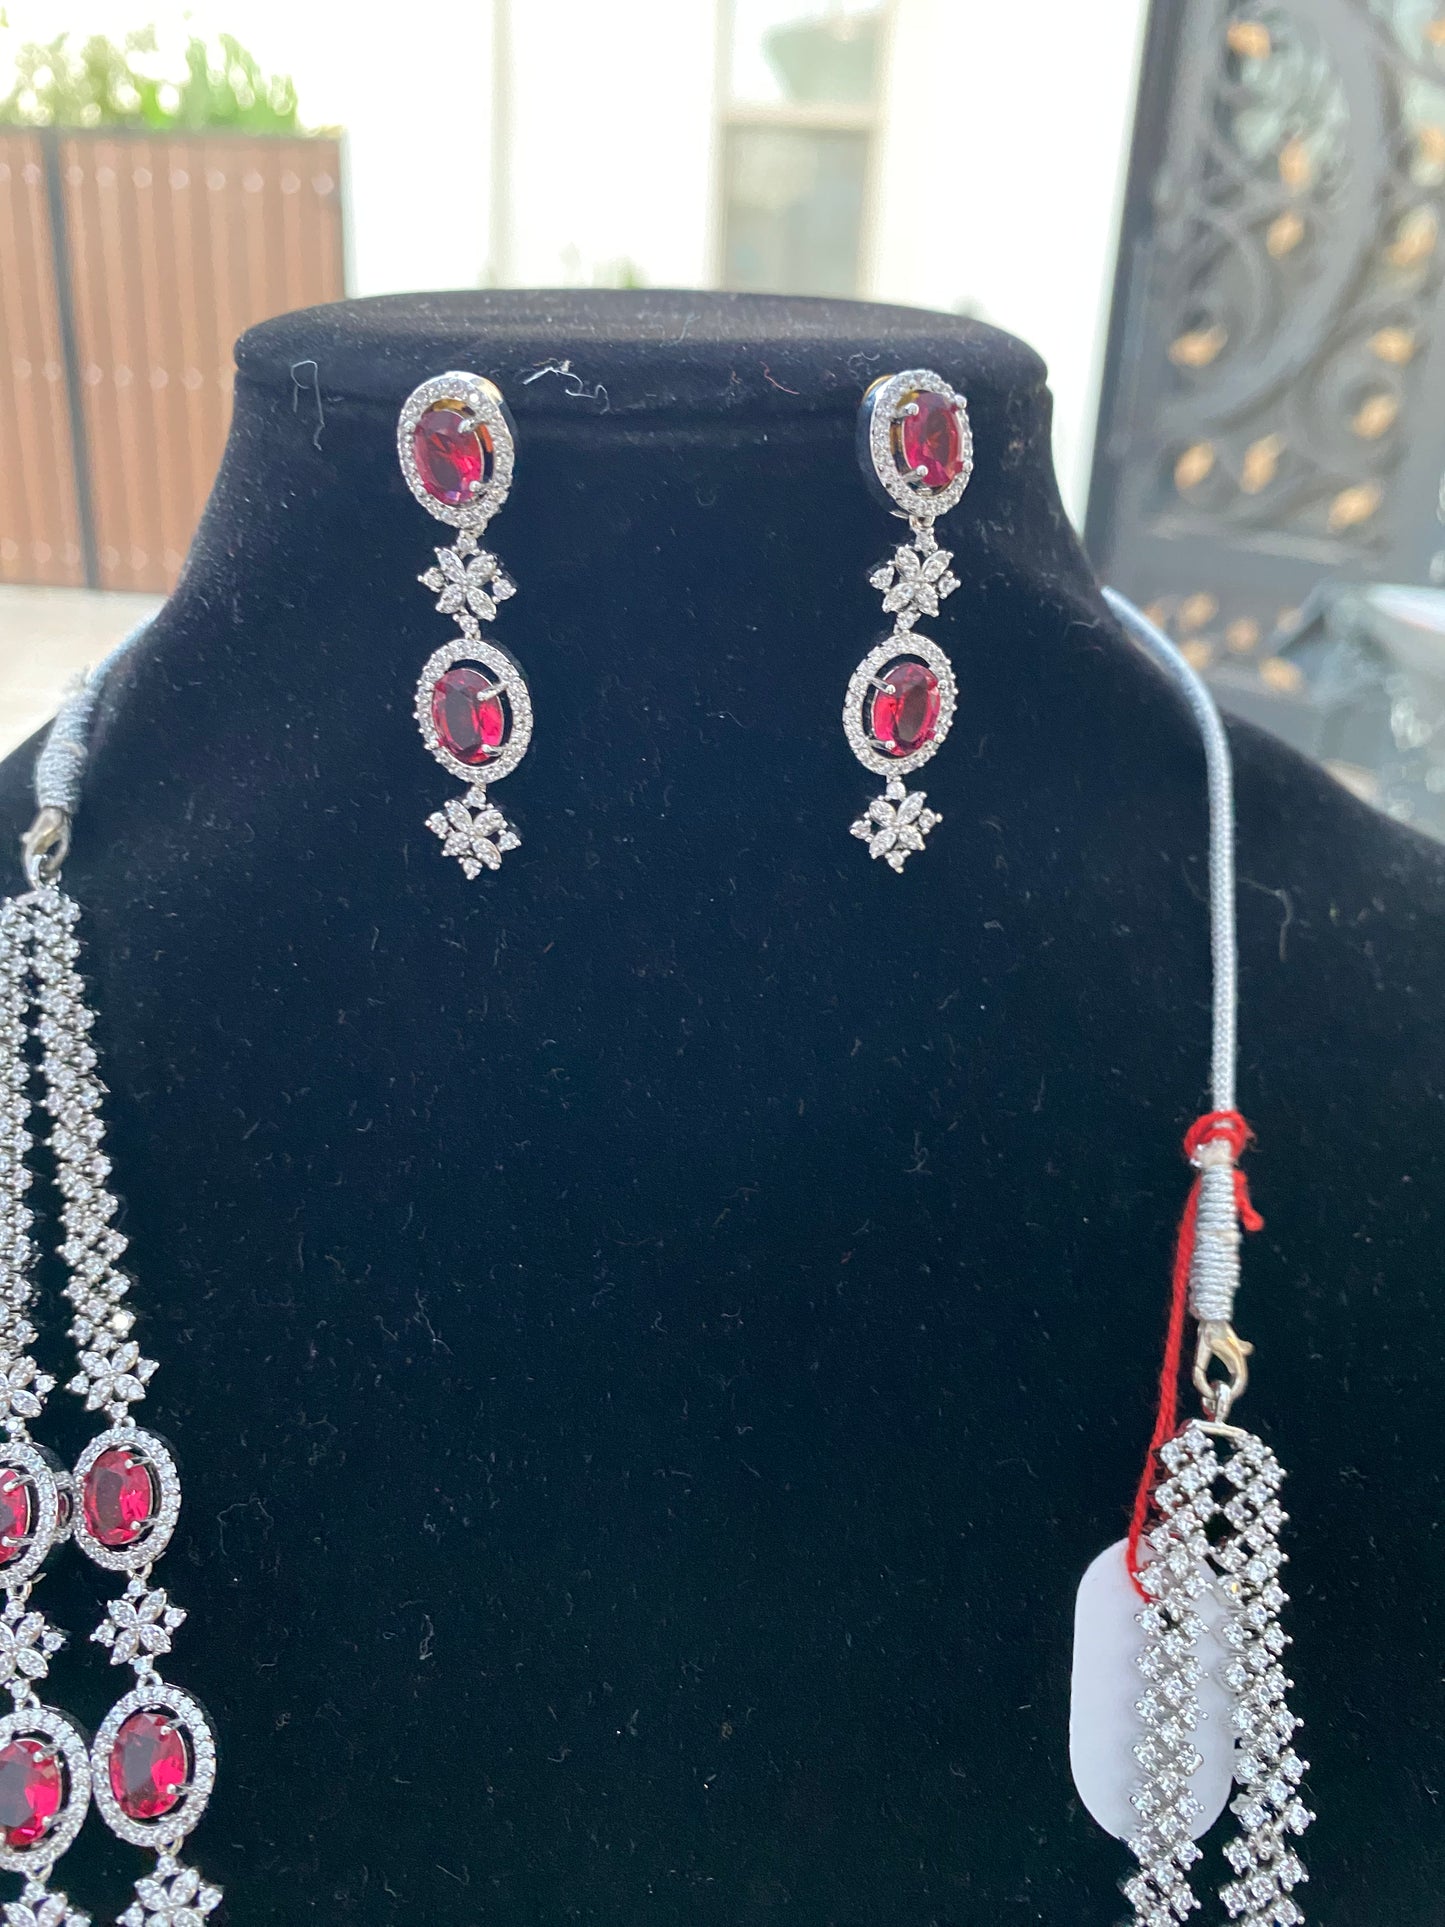 American Diamonds Necklace And Earrings with Red Stones in Chandler